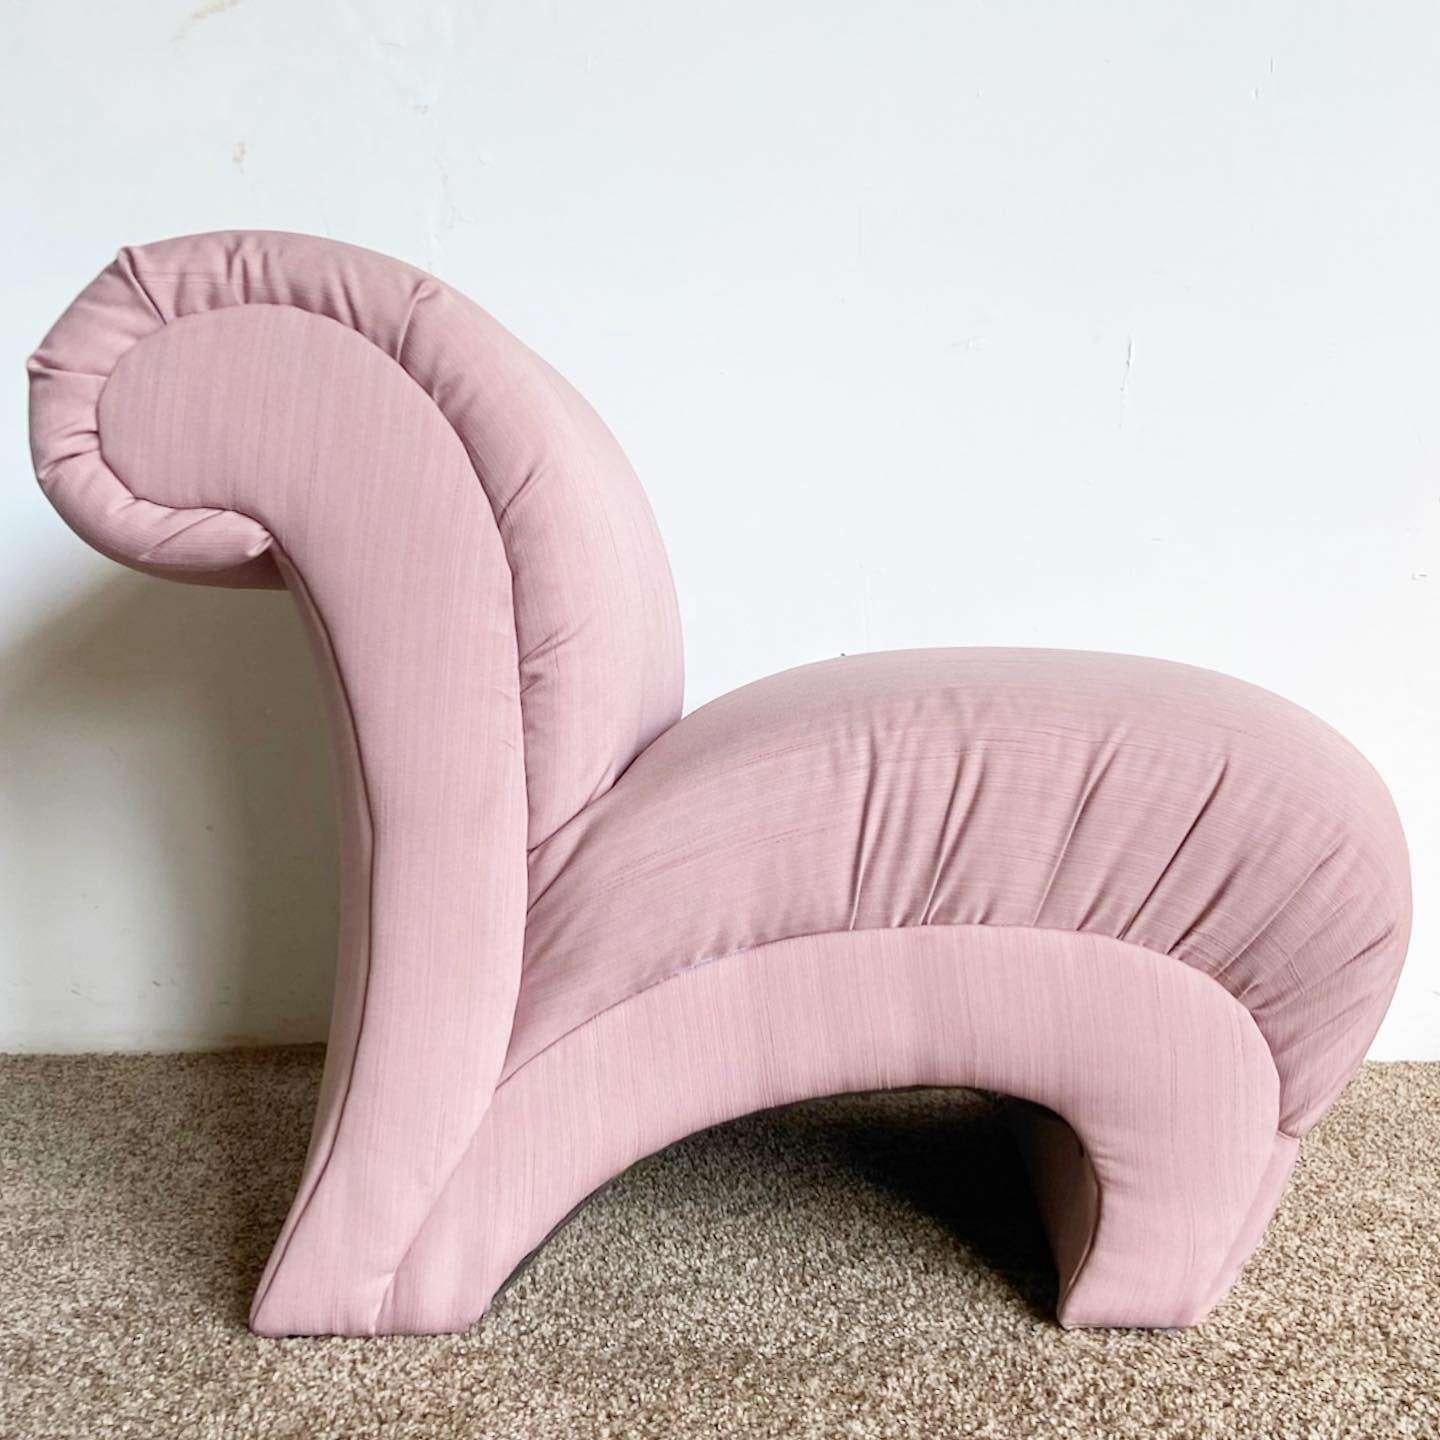 Incredible vintage postmodern sculptural lounge chair/sofa chair. Features a pink fabric throughout.
